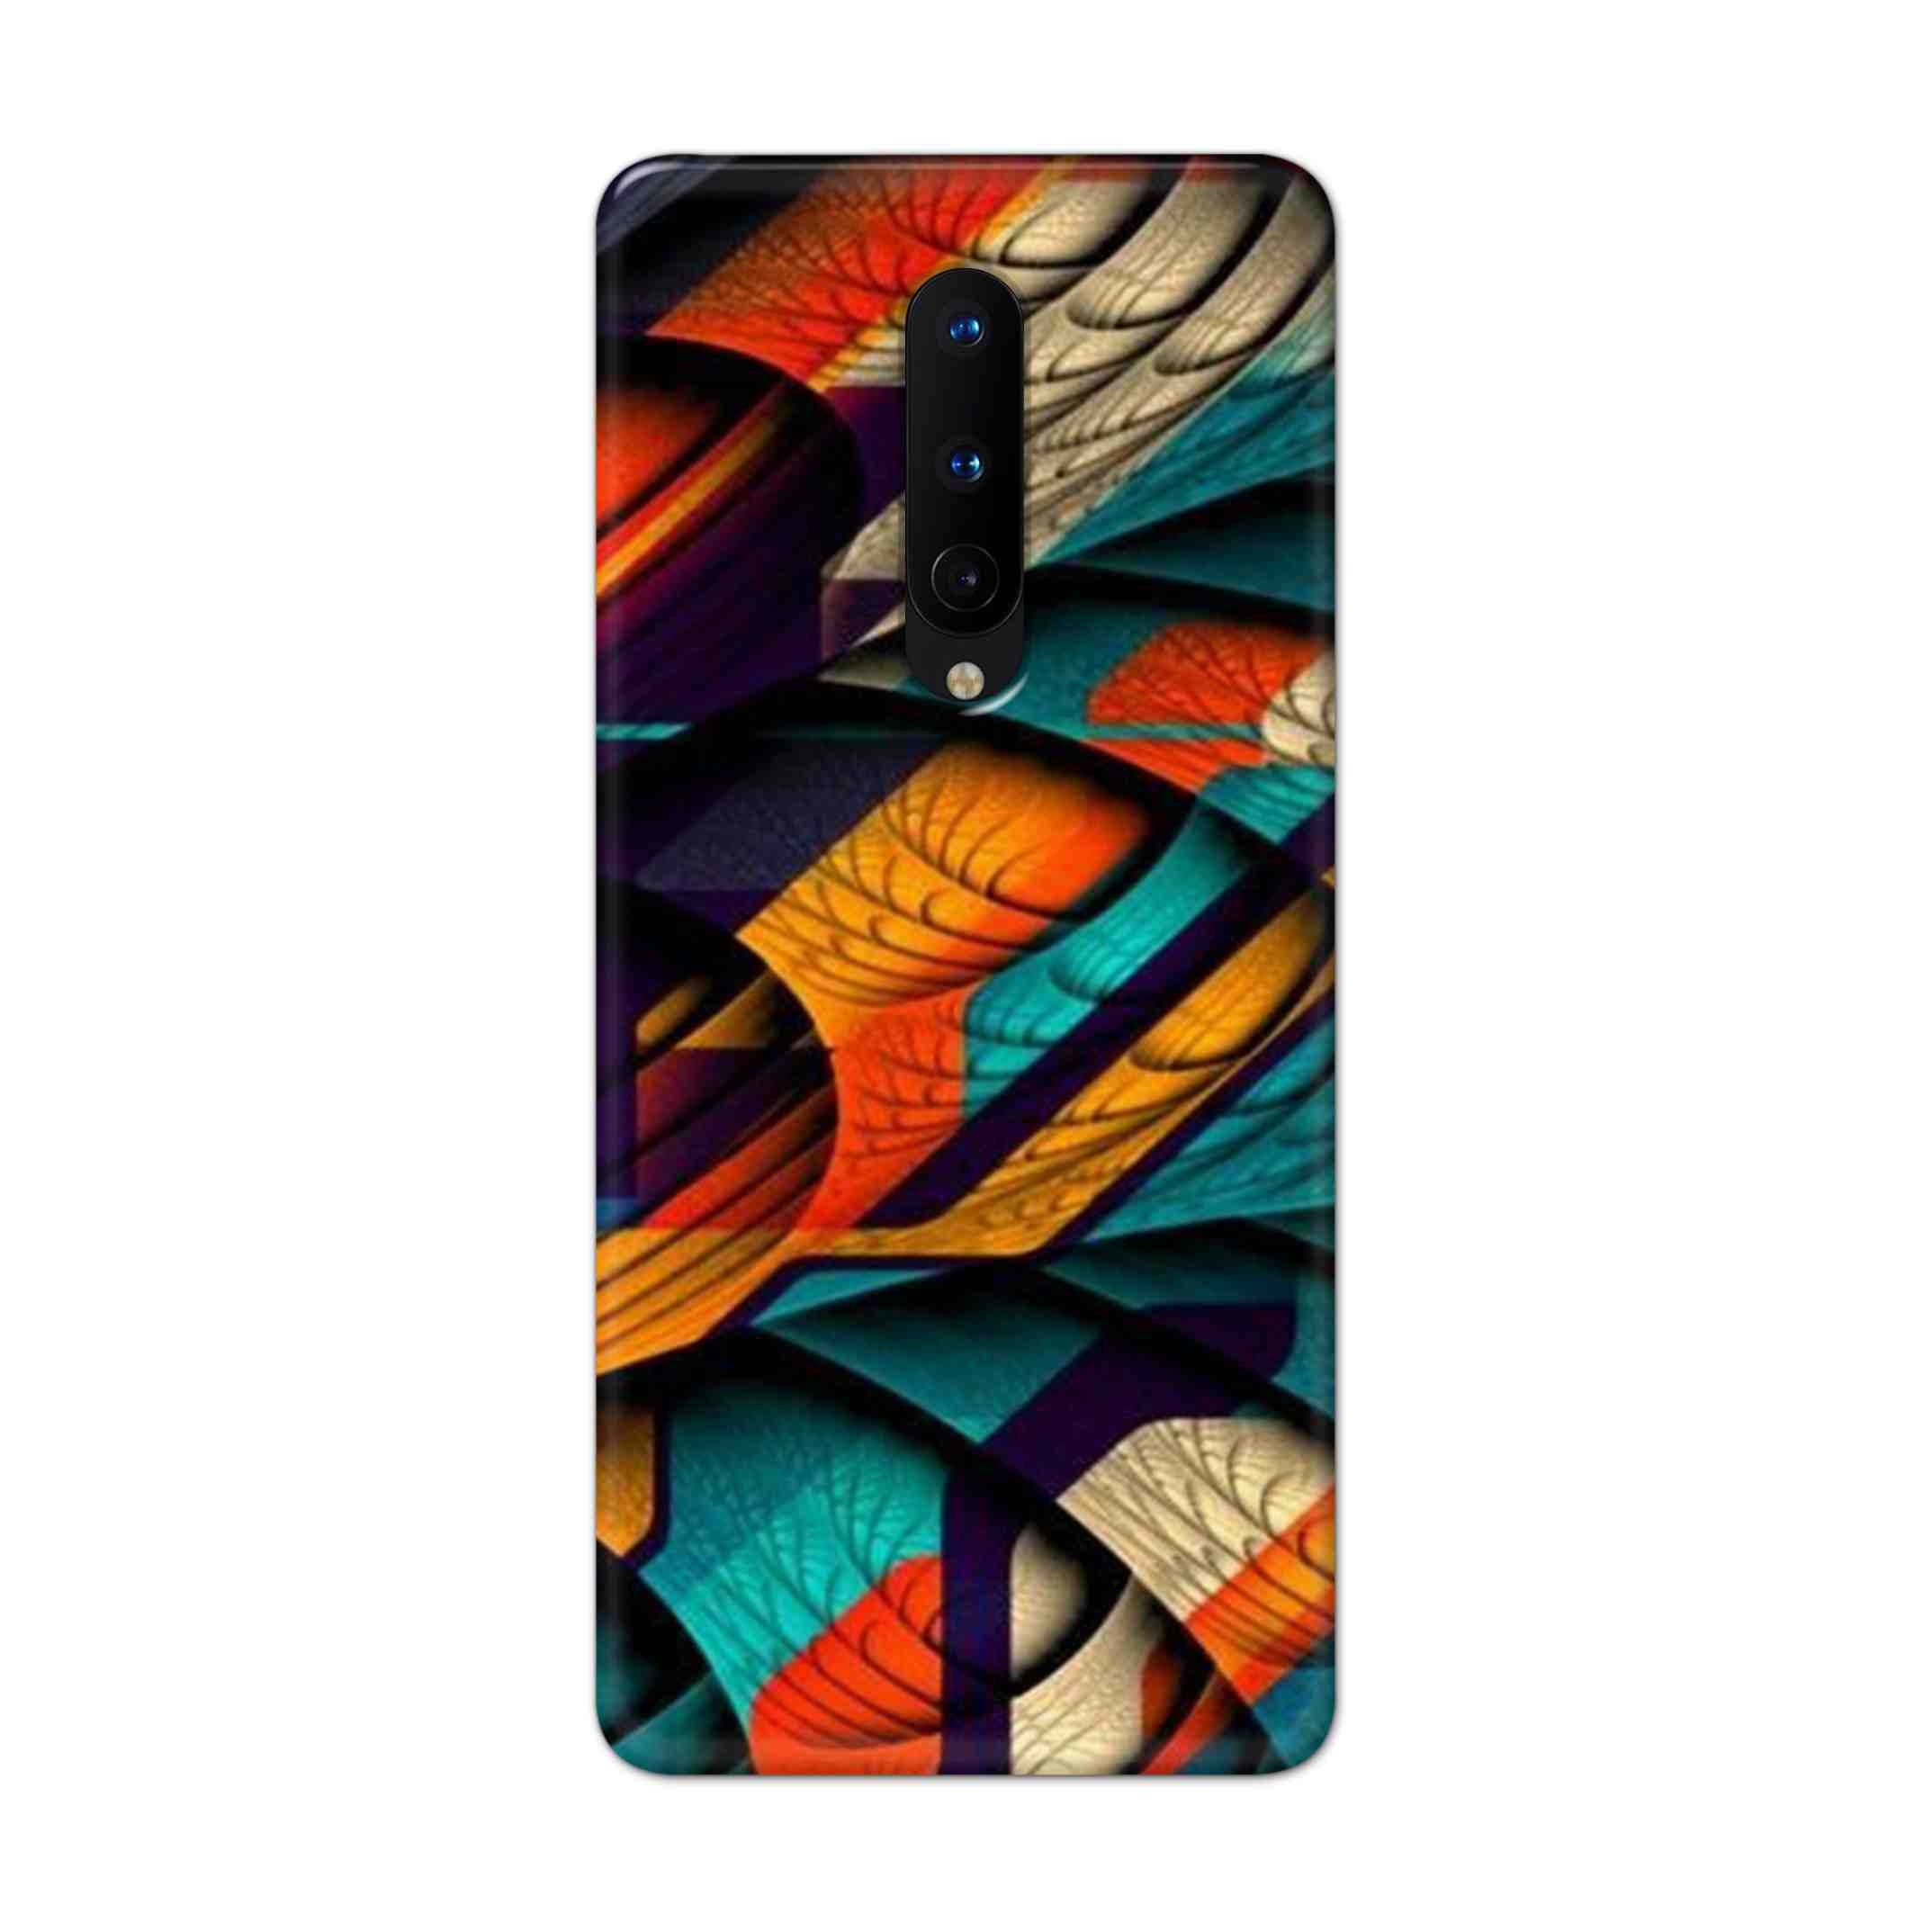 Buy Colour Abstract Hard Back Mobile Phone Case Cover For OnePlus 8 Online